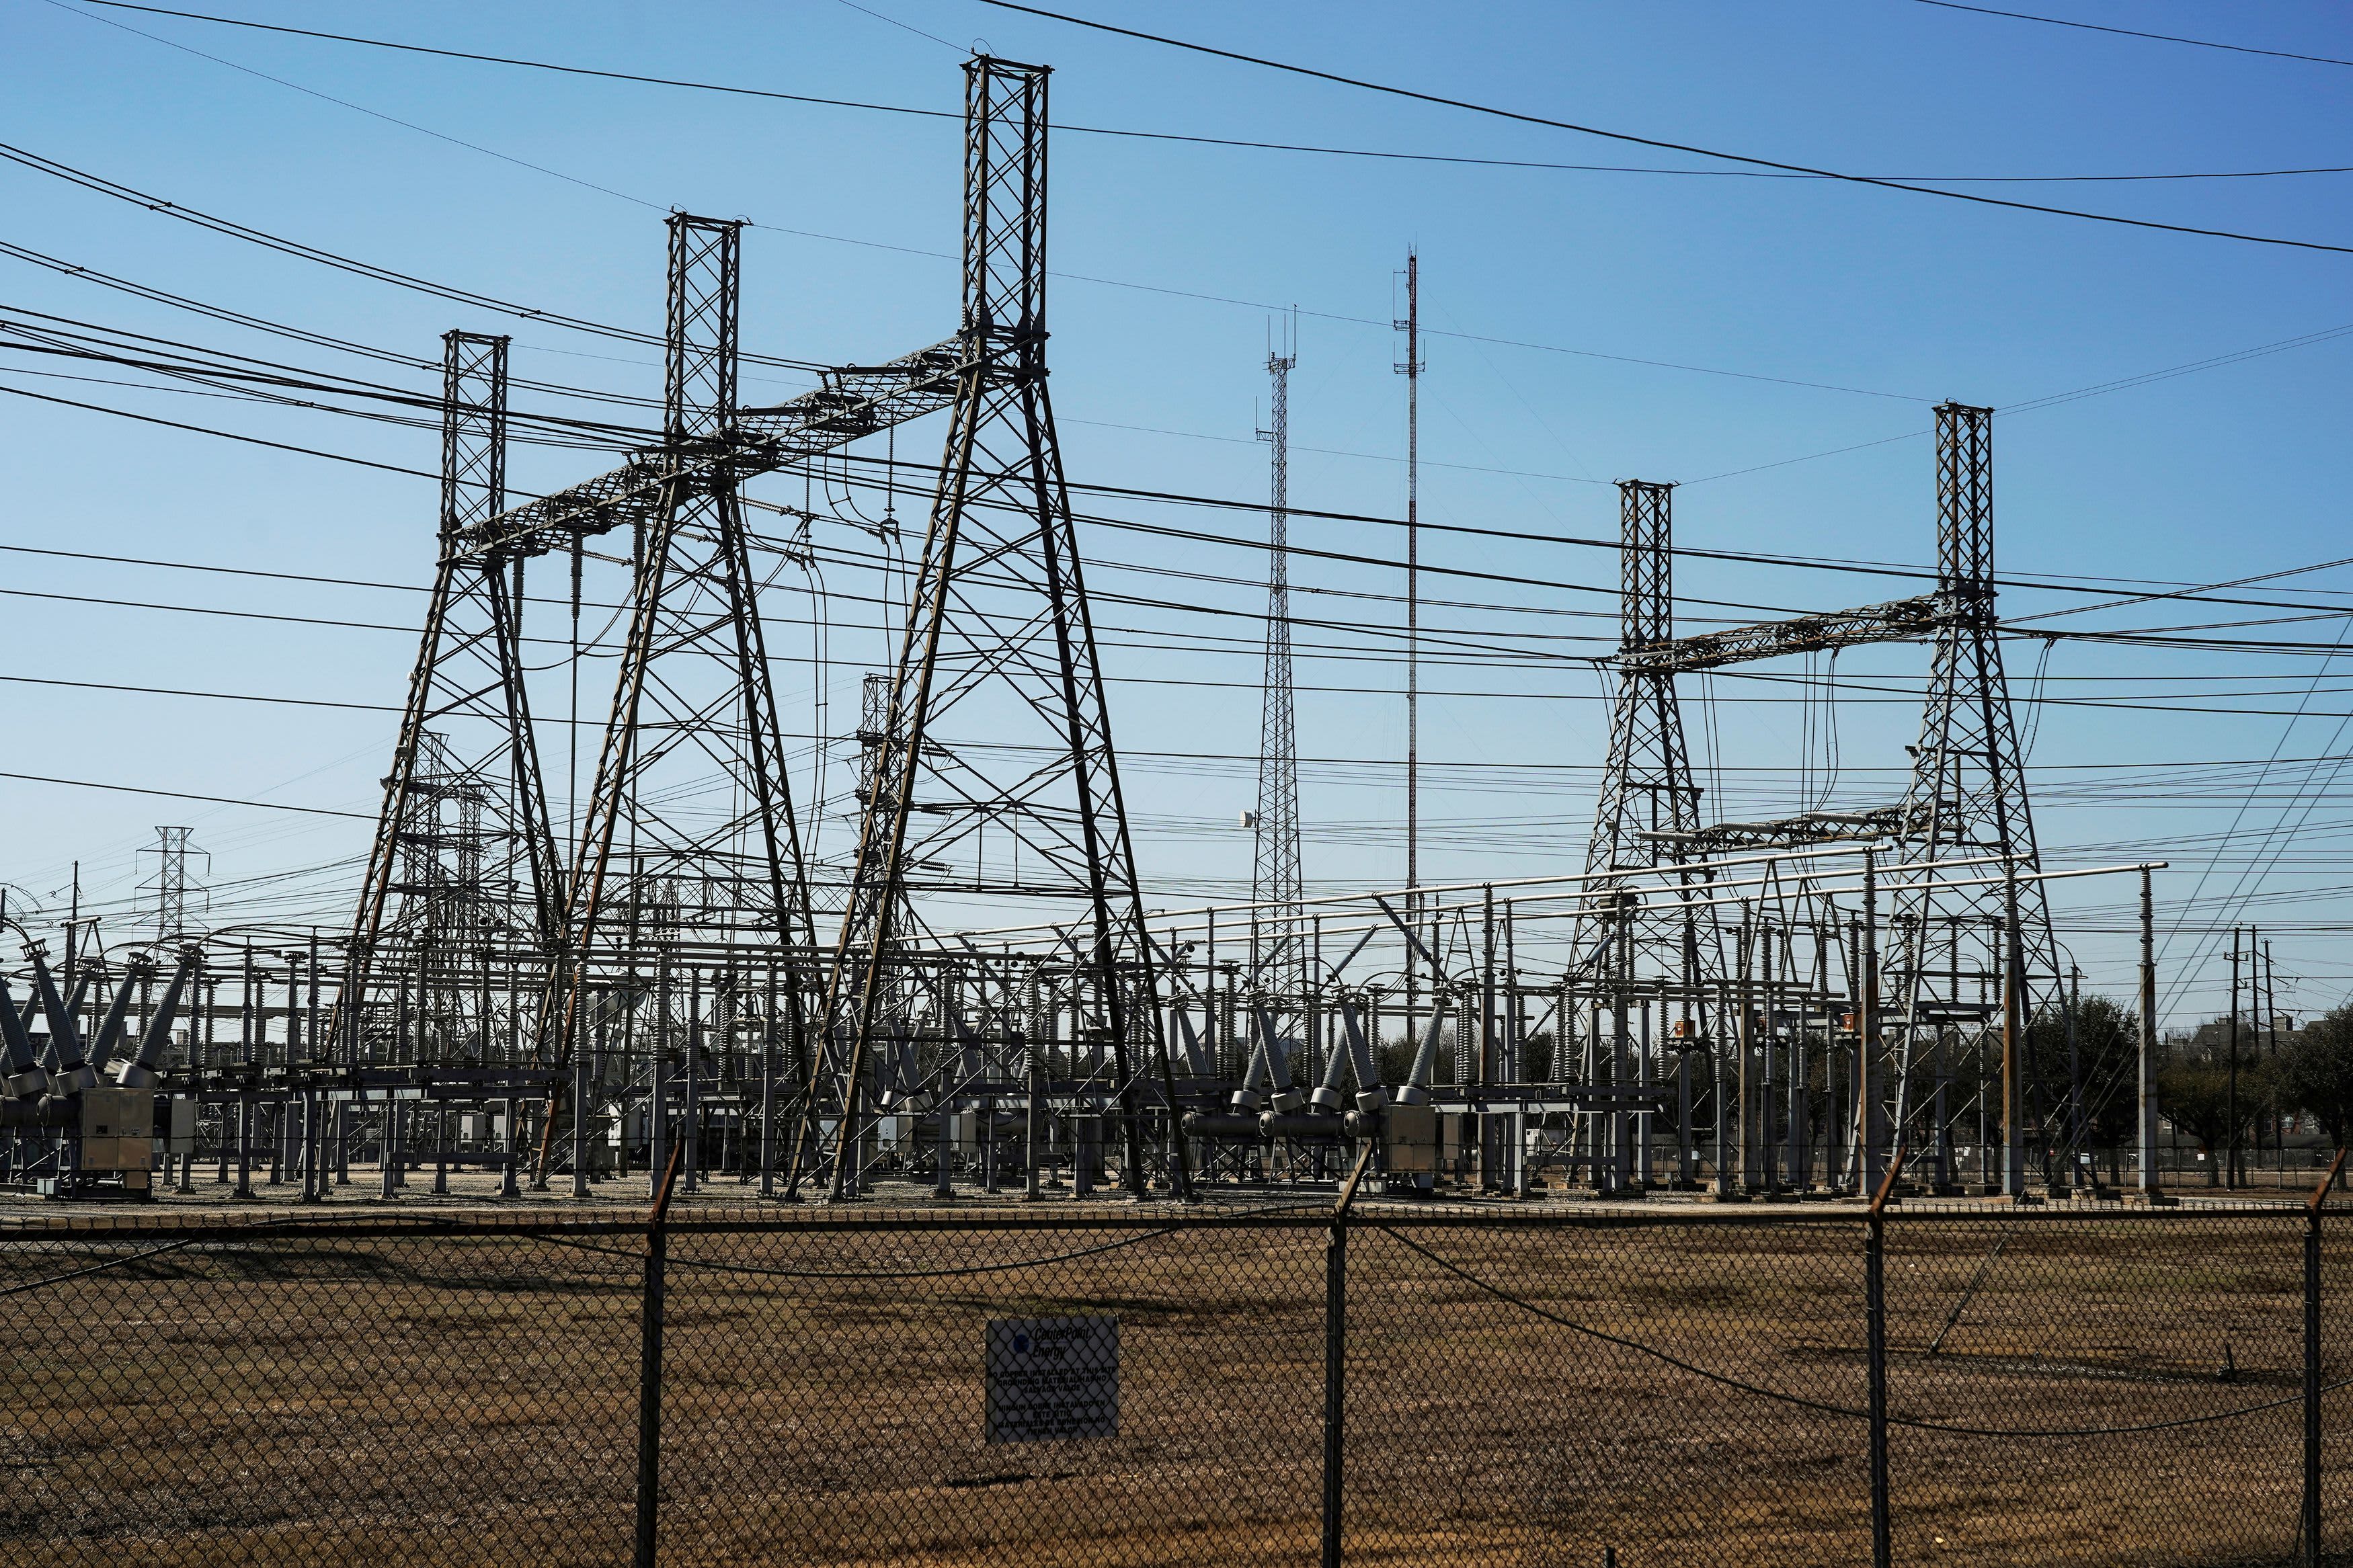 Why the U.S. power grid has become unreliable